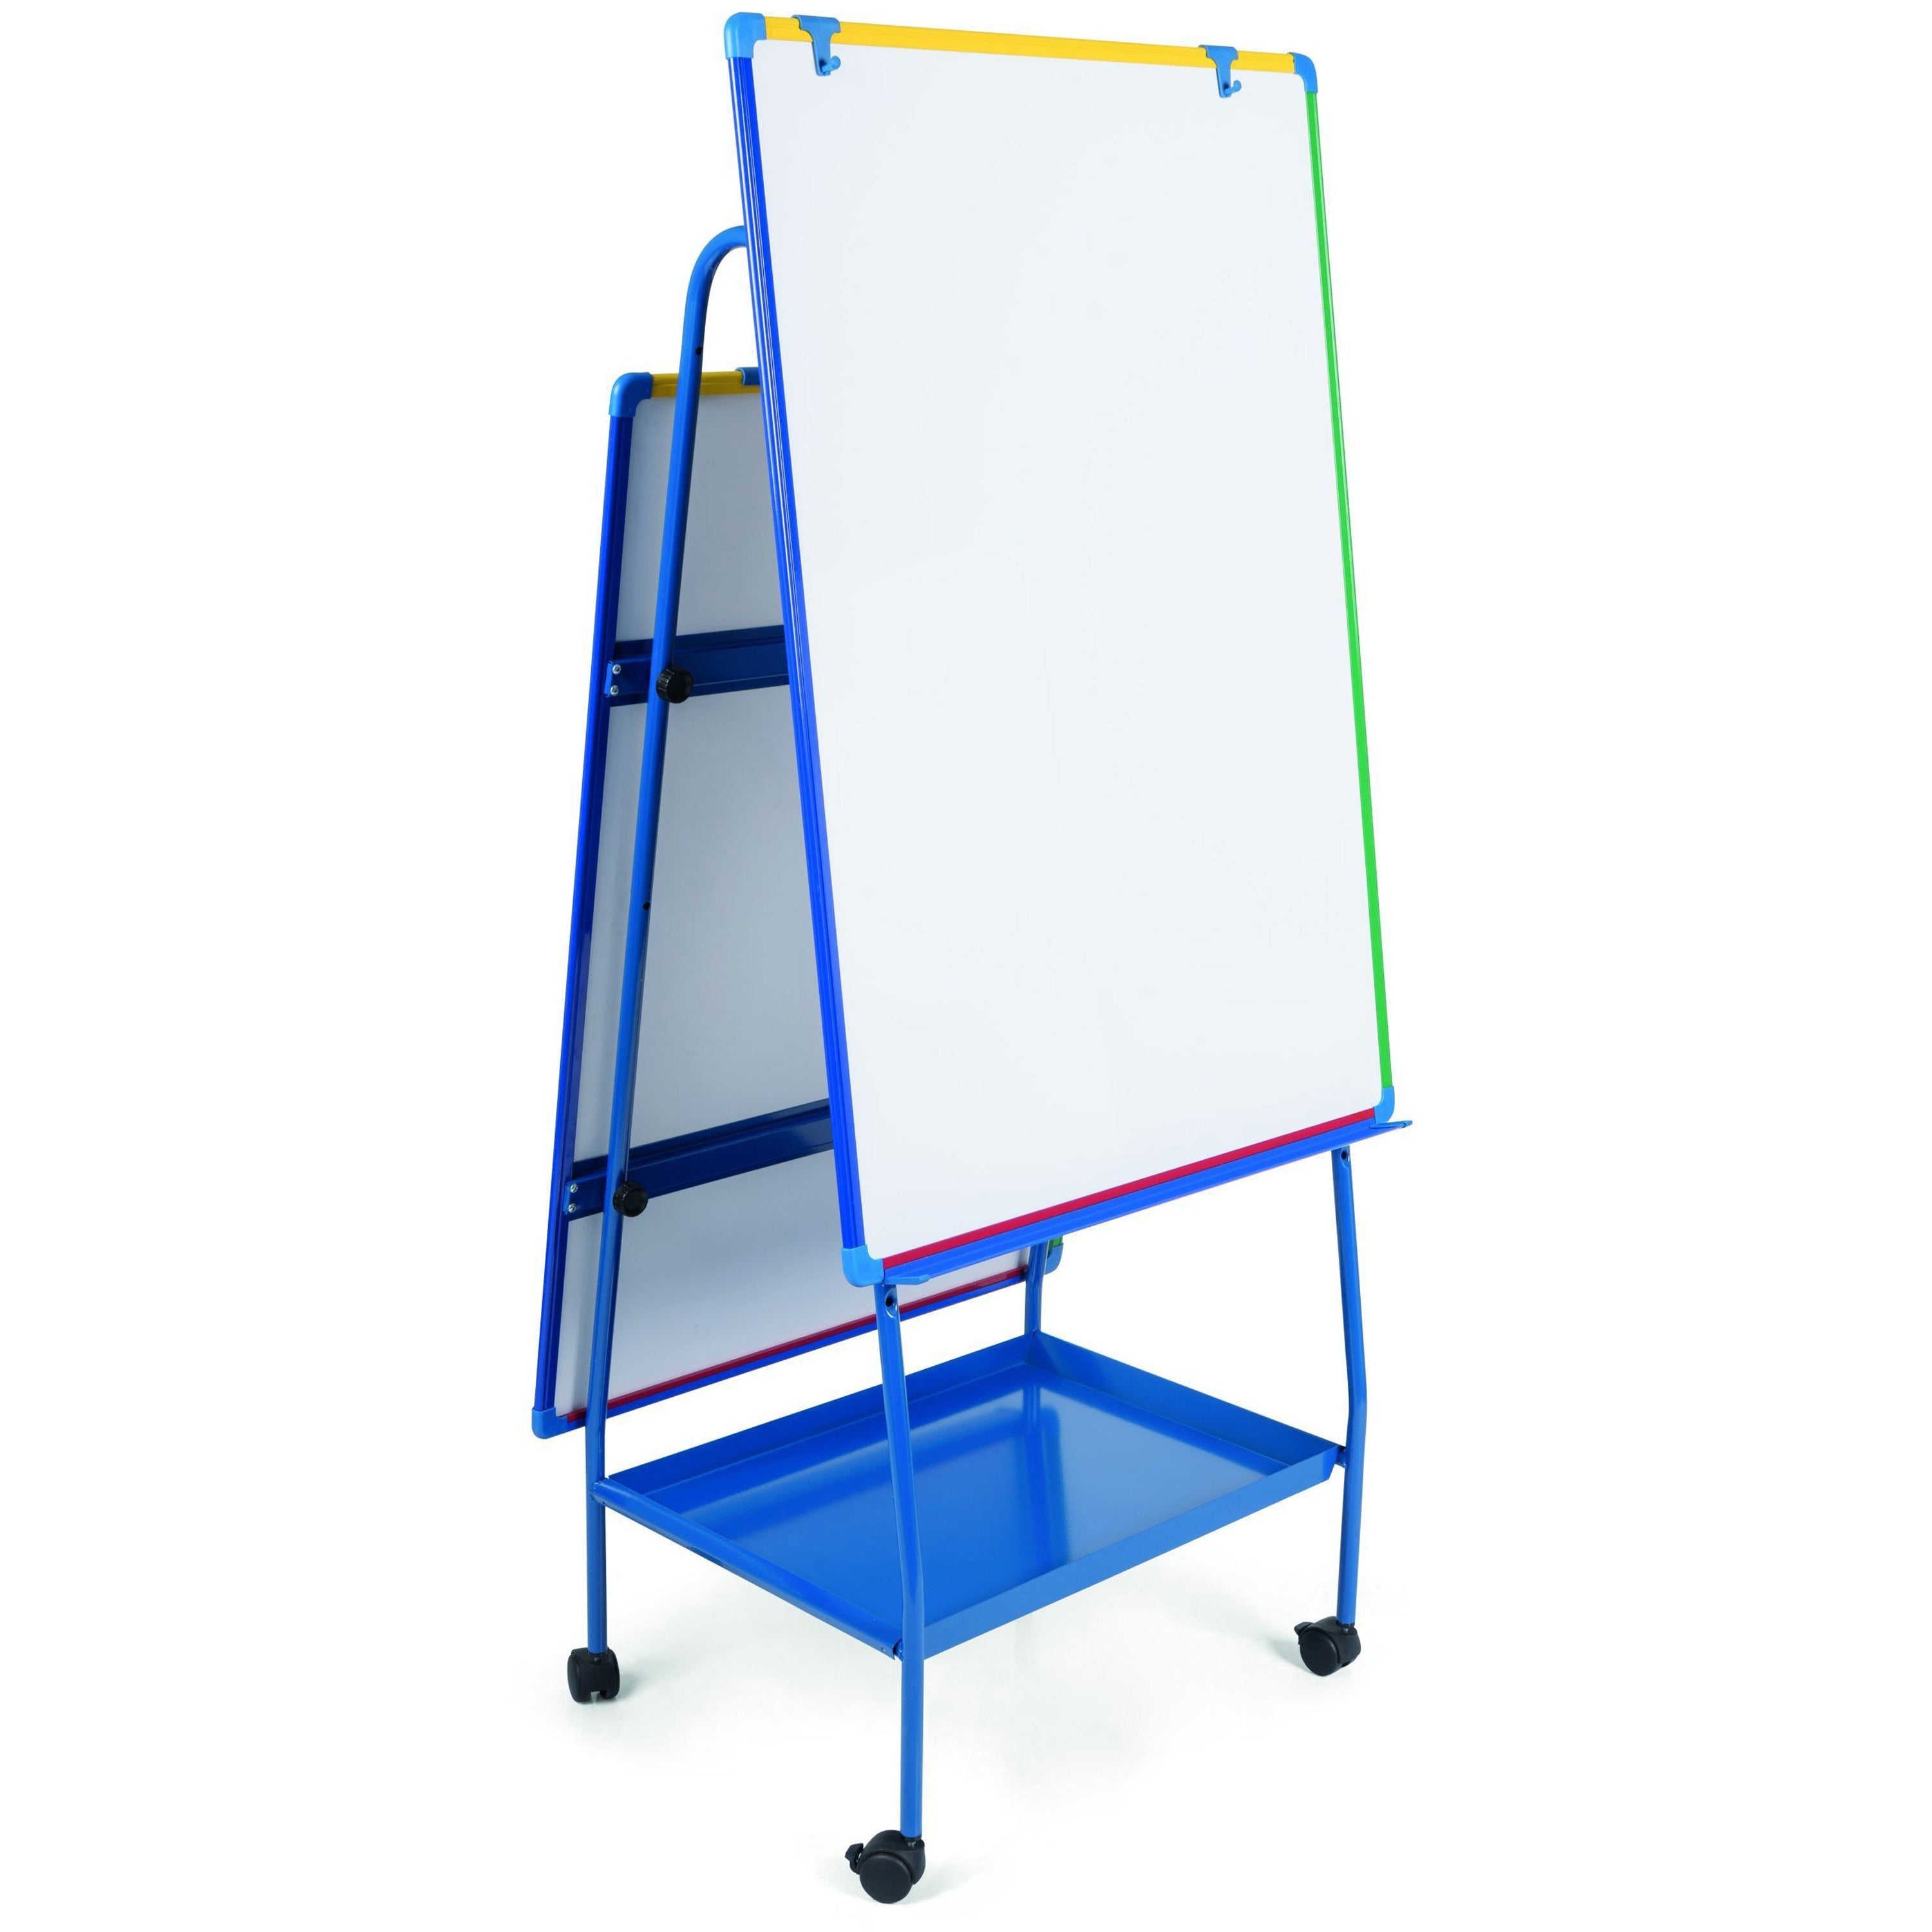 bi-office-magnetic-adjustabledoublee-sided-easel-white-surface-rectangle-magnetic-assembly-required-1-each_bvcea49145026 - 1